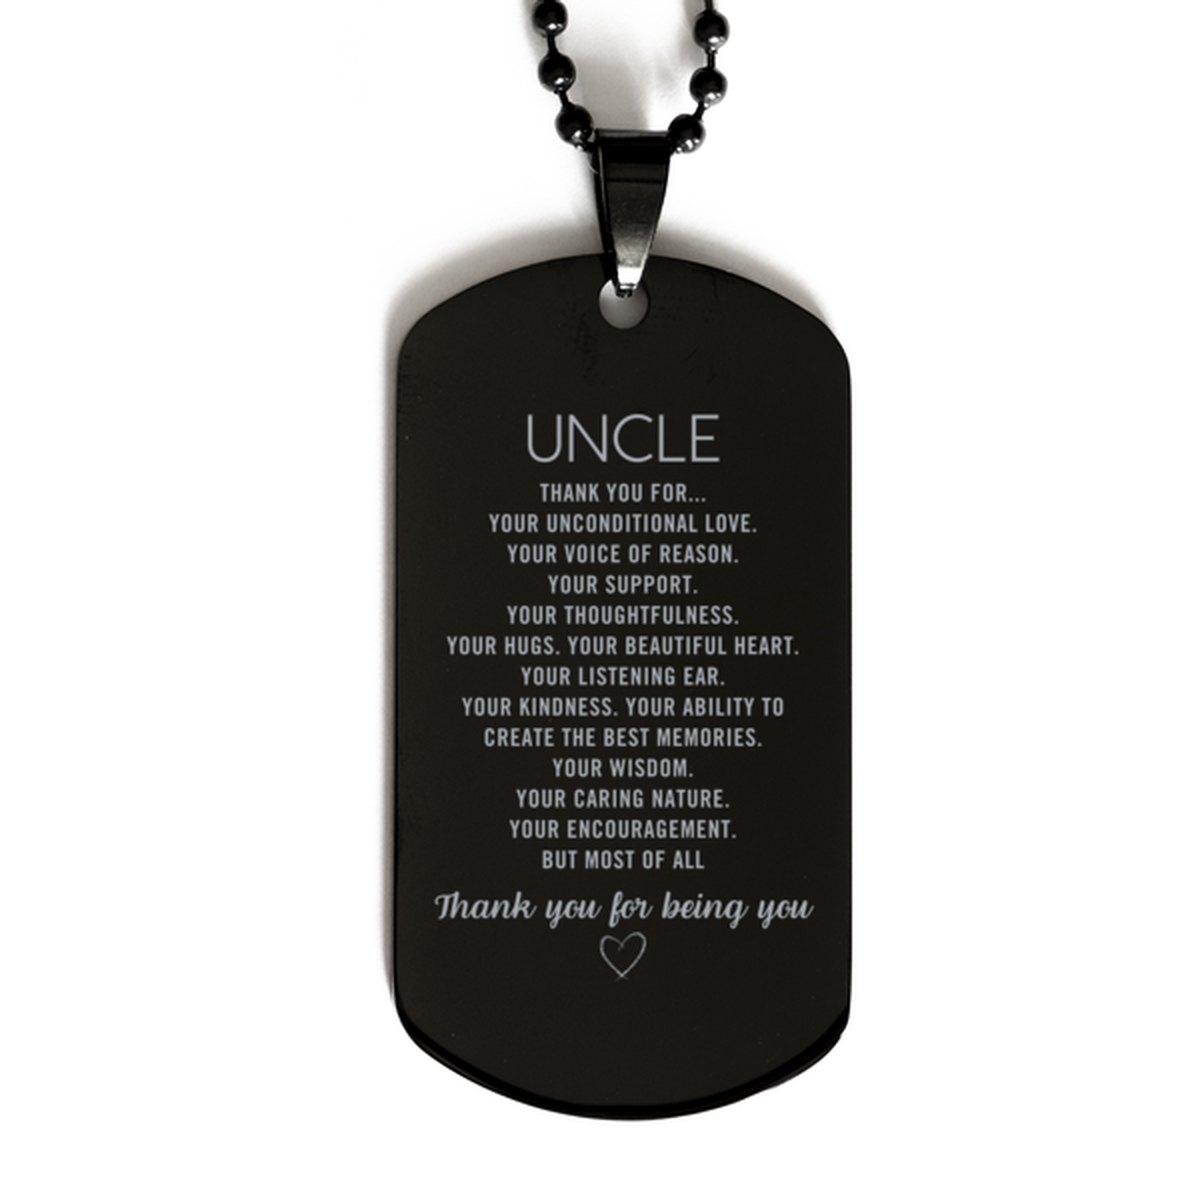 Uncle Black Dog Tag Custom, Engraved Gifts For Uncle Christmas Graduation Birthday Gifts for Men Women Uncle Thank you for Your unconditional love